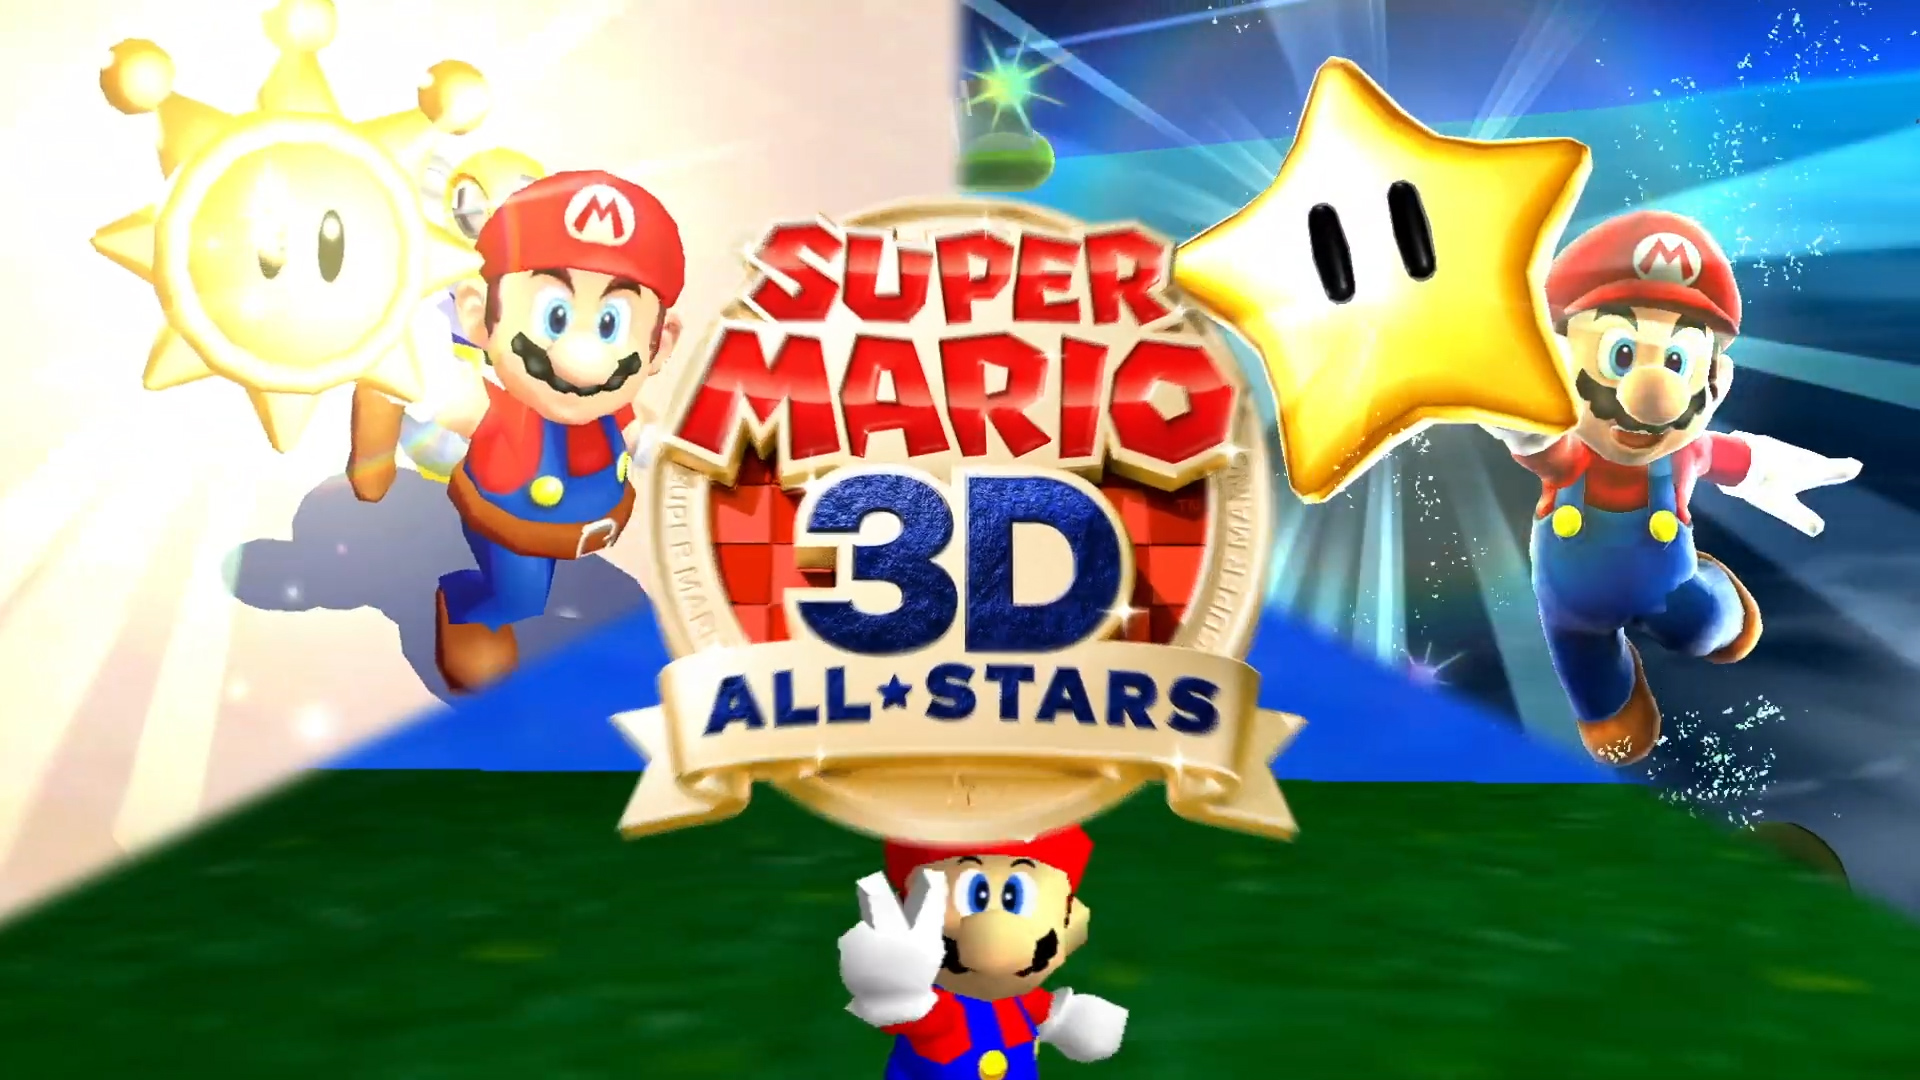 Review: 'Super Mario 3D All-Stars' replays franchise history